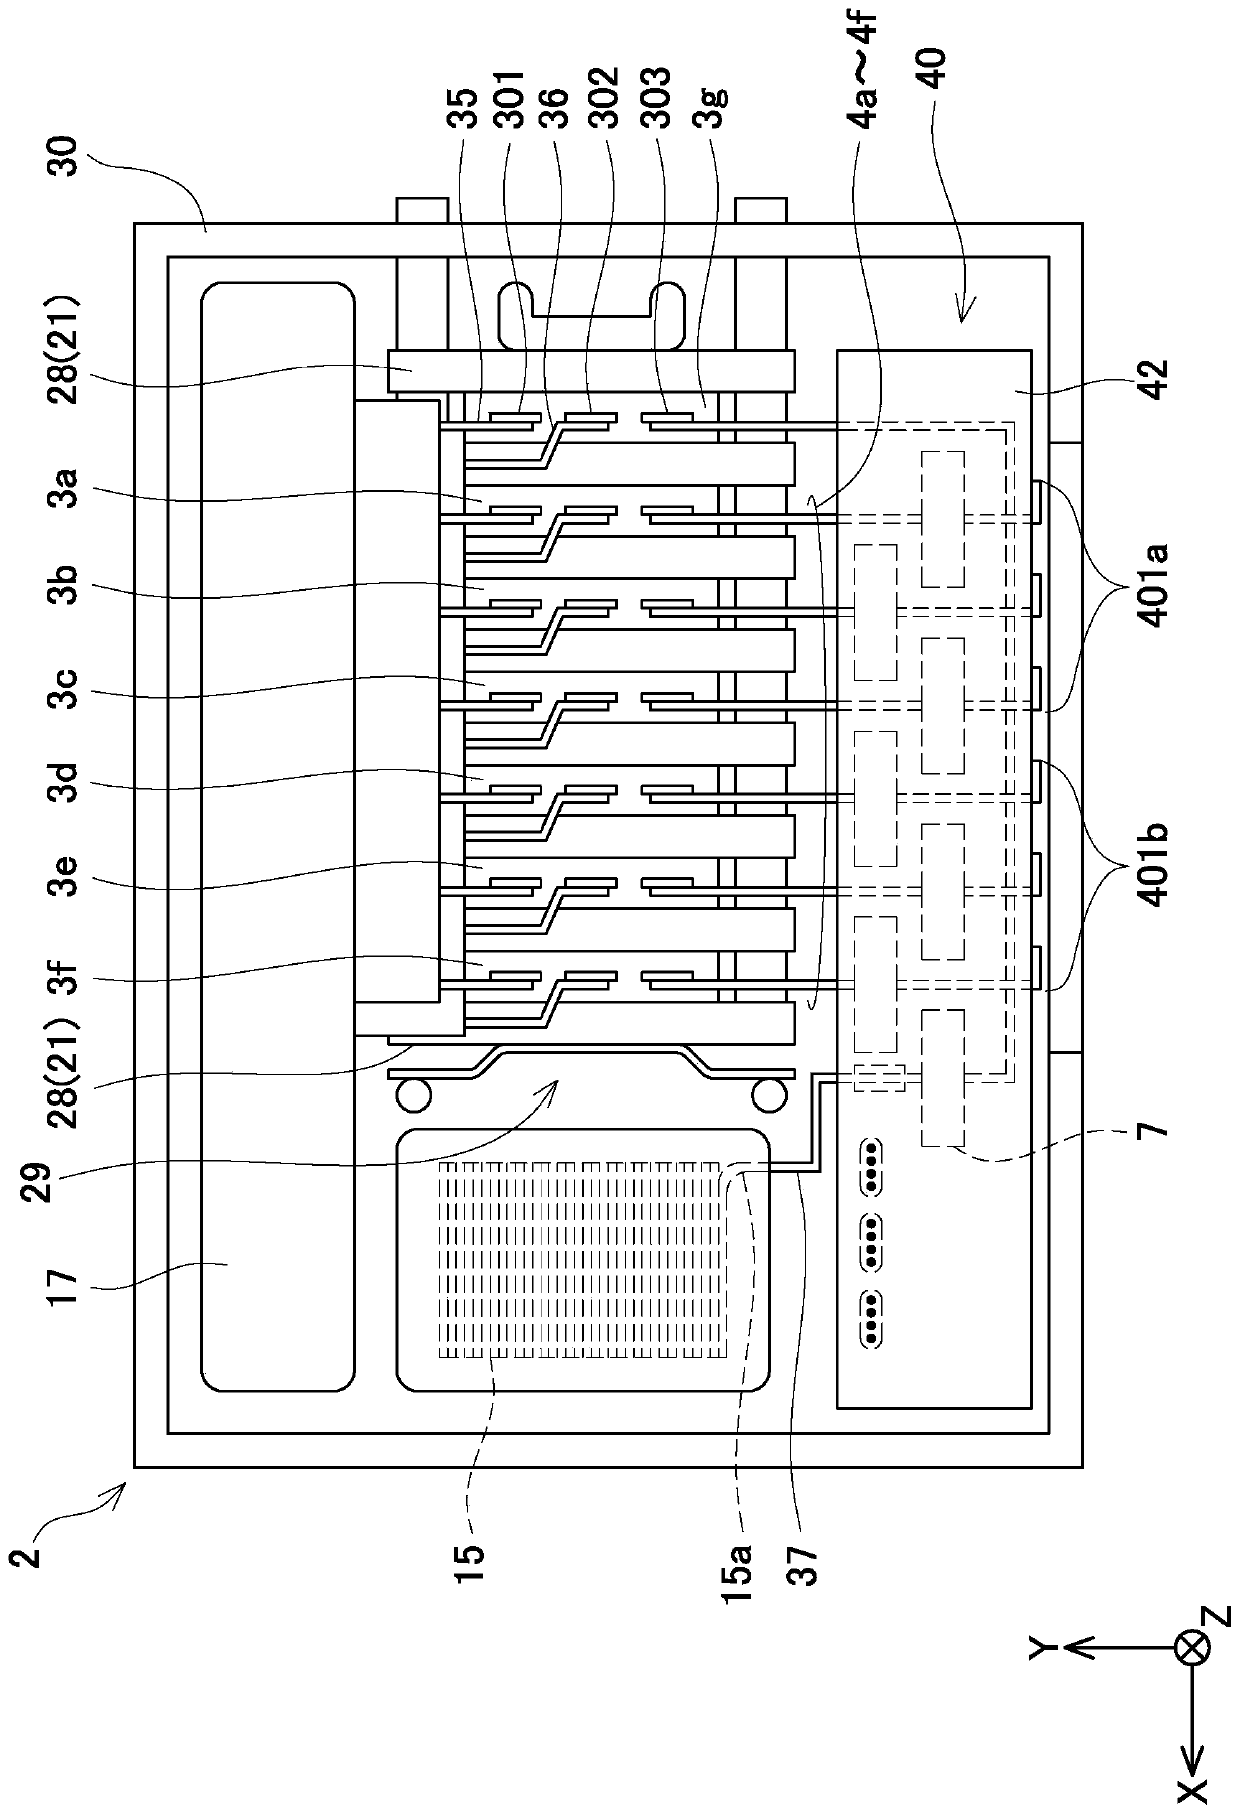 Power converter for electric vehicle